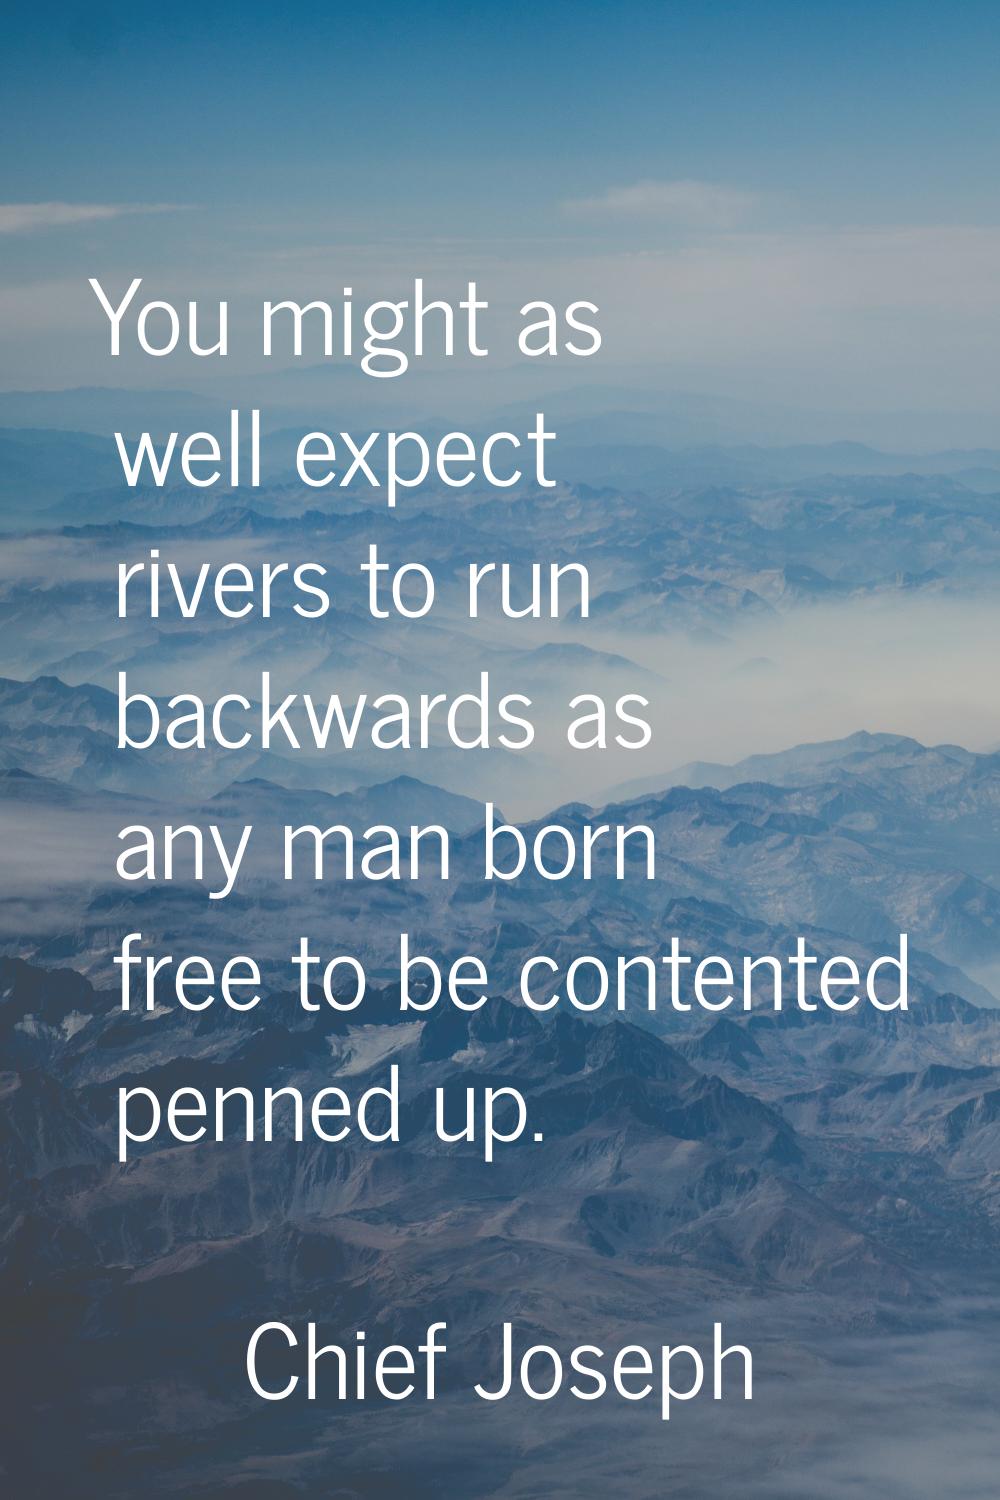 You might as well expect rivers to run backwards as any man born free to be contented penned up.